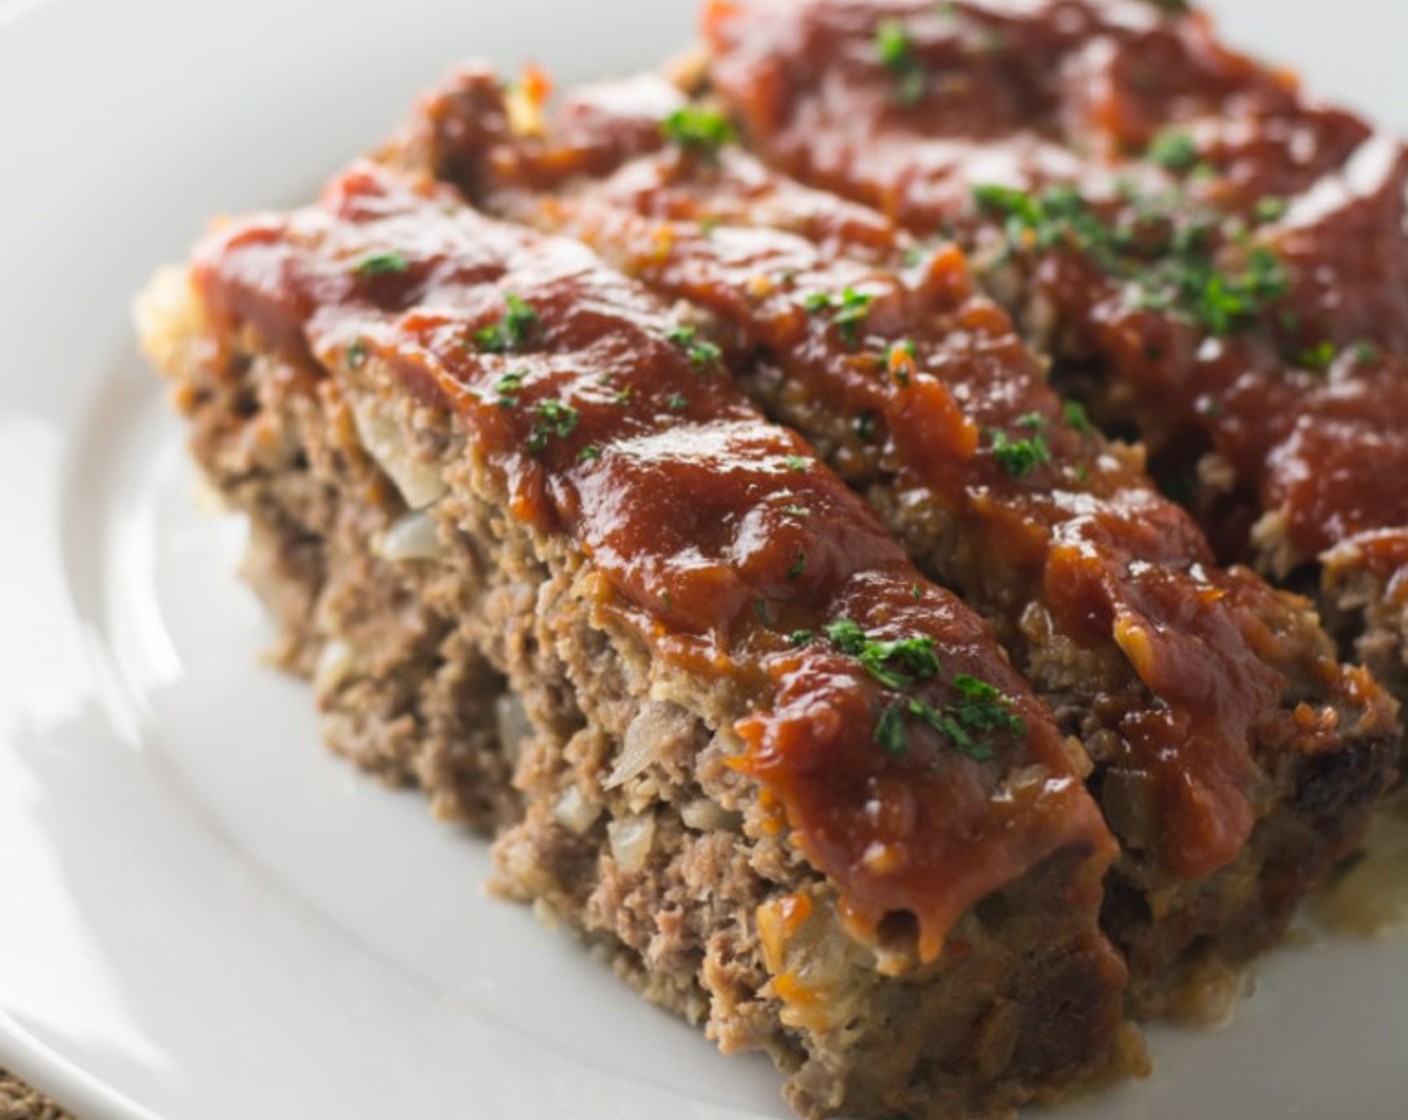 step 7 Let the meatloaf rest for about 10 minutes before you transfer it to a serving dish. Serve with your favorite side dish! Enjoy!